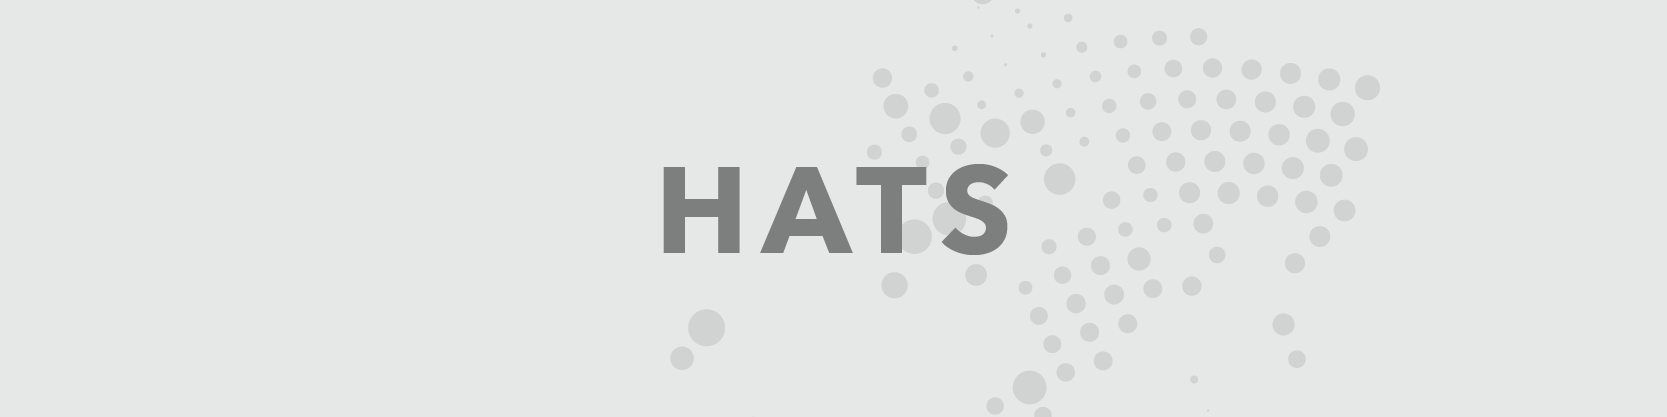 Hat Button: For things that you put on your head.